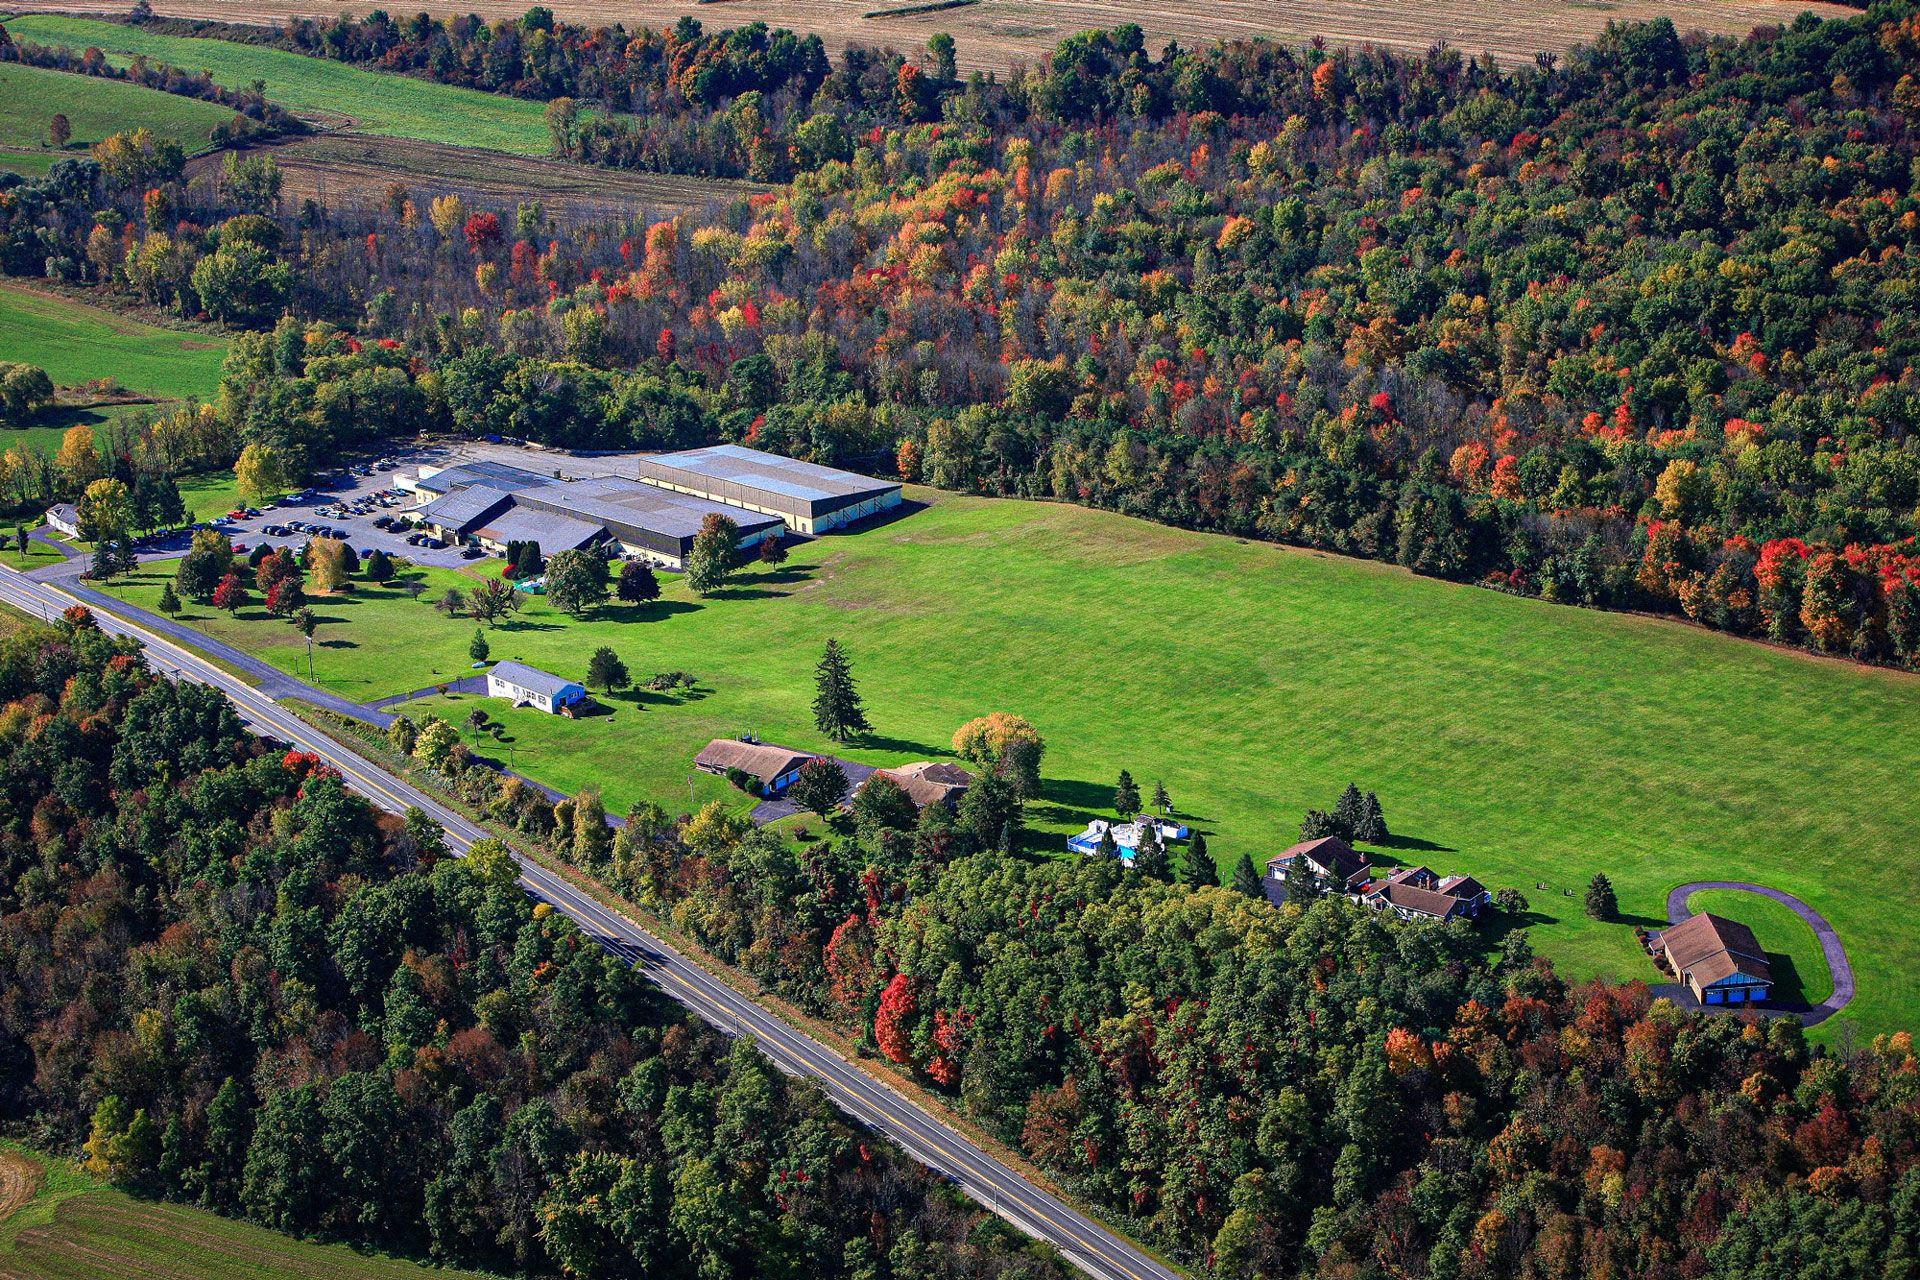 Nutrition Bar Confectioners headquarters and facility in Cato, NY